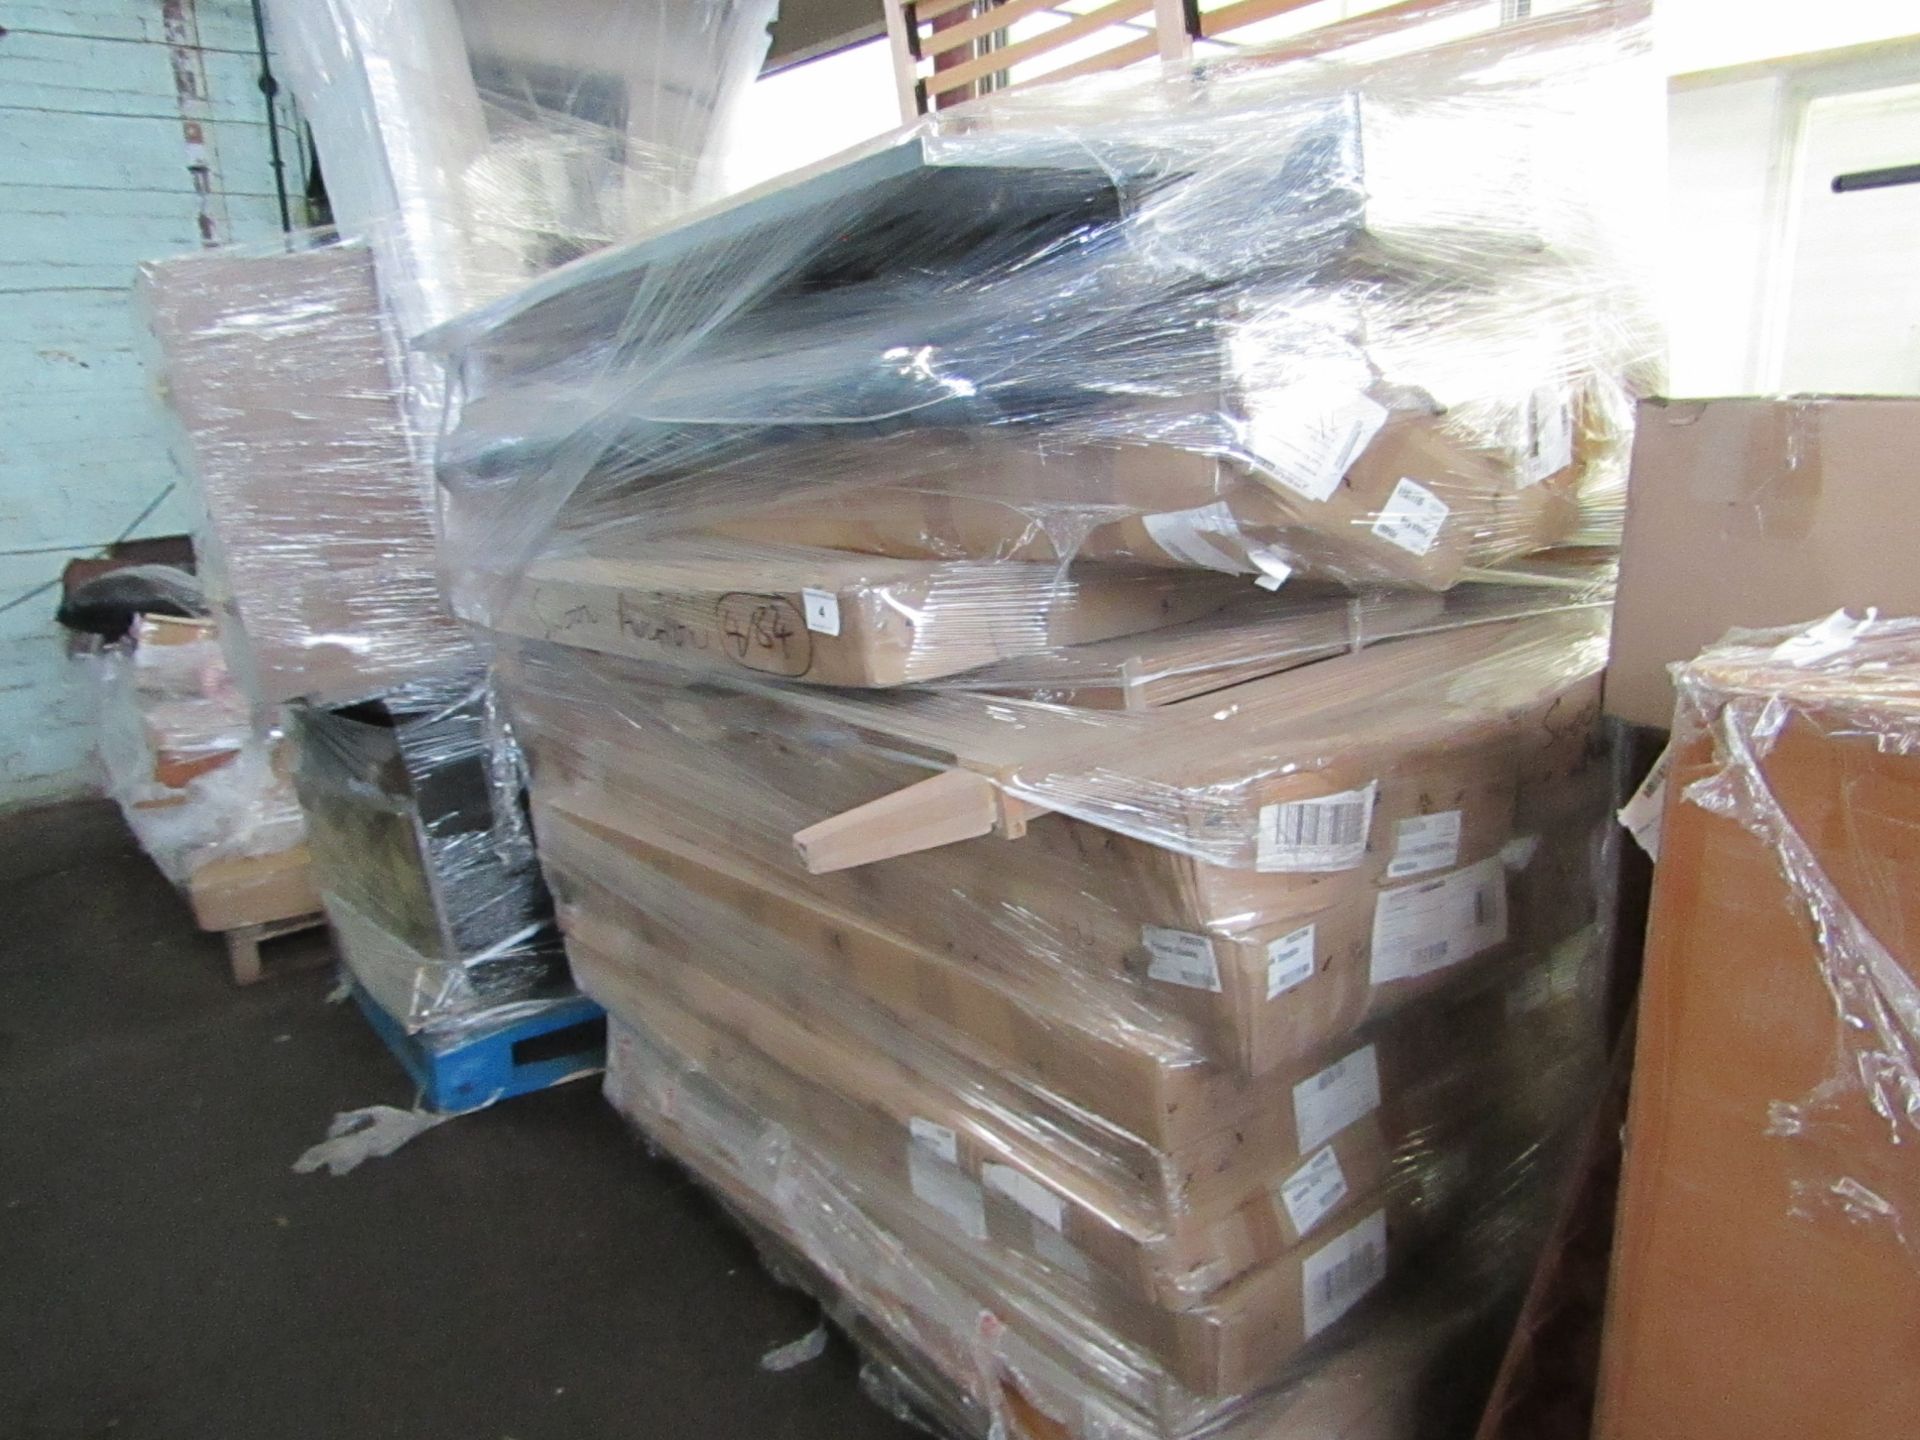 Mixed pallet of Swoon Editions customer returns to include 6 items of stock with a total RRP of